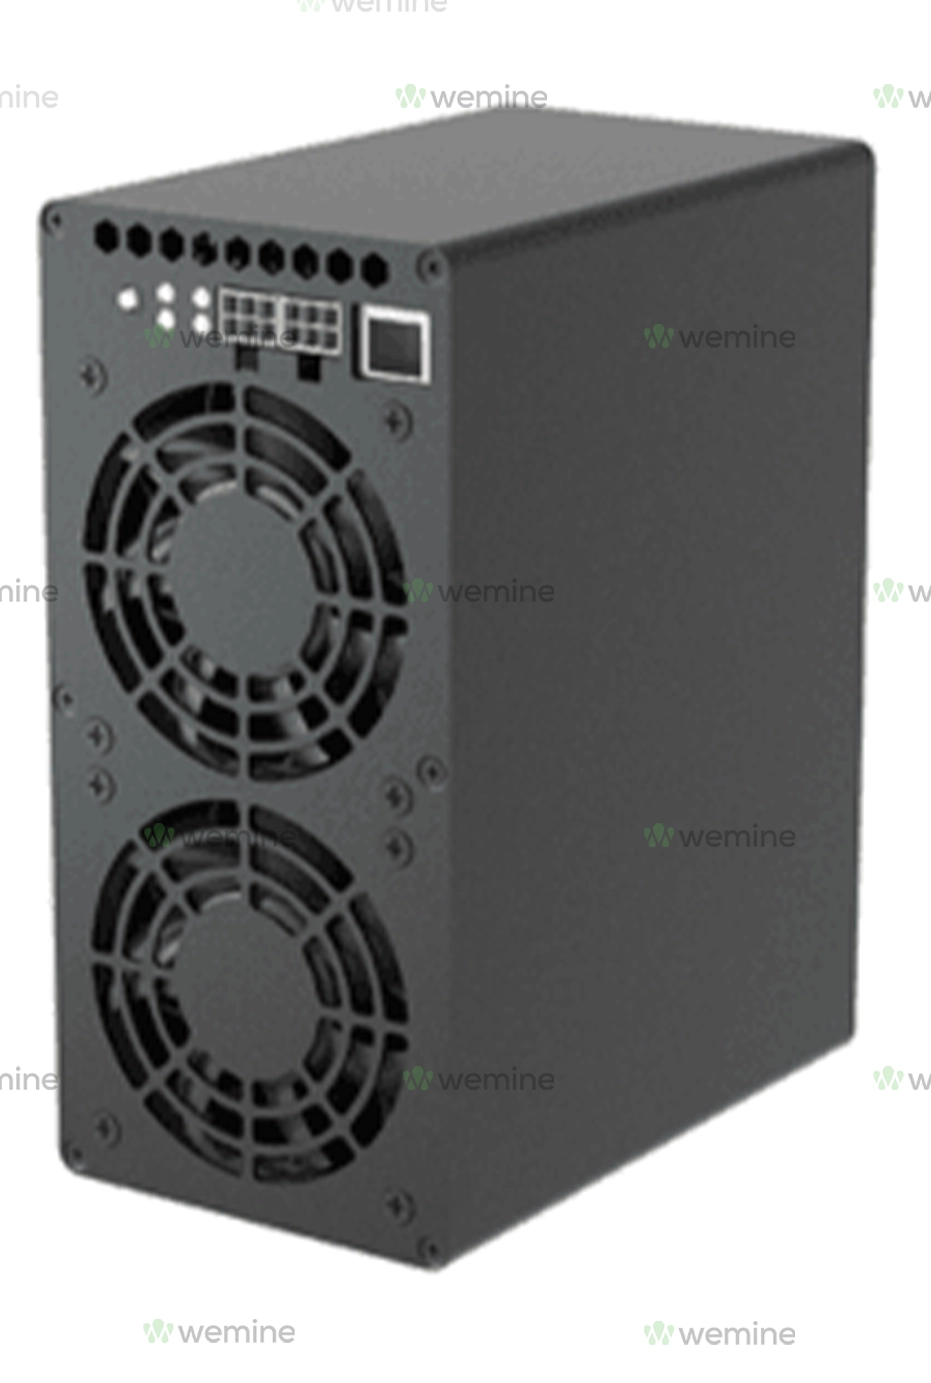 Compact and sleek Goldshell SC-Box II Cryptocurrency Miner with a 1.9TH/s hash rate, featuring dual cooling fans and interface indicators on the back panel, in a matte black finish."